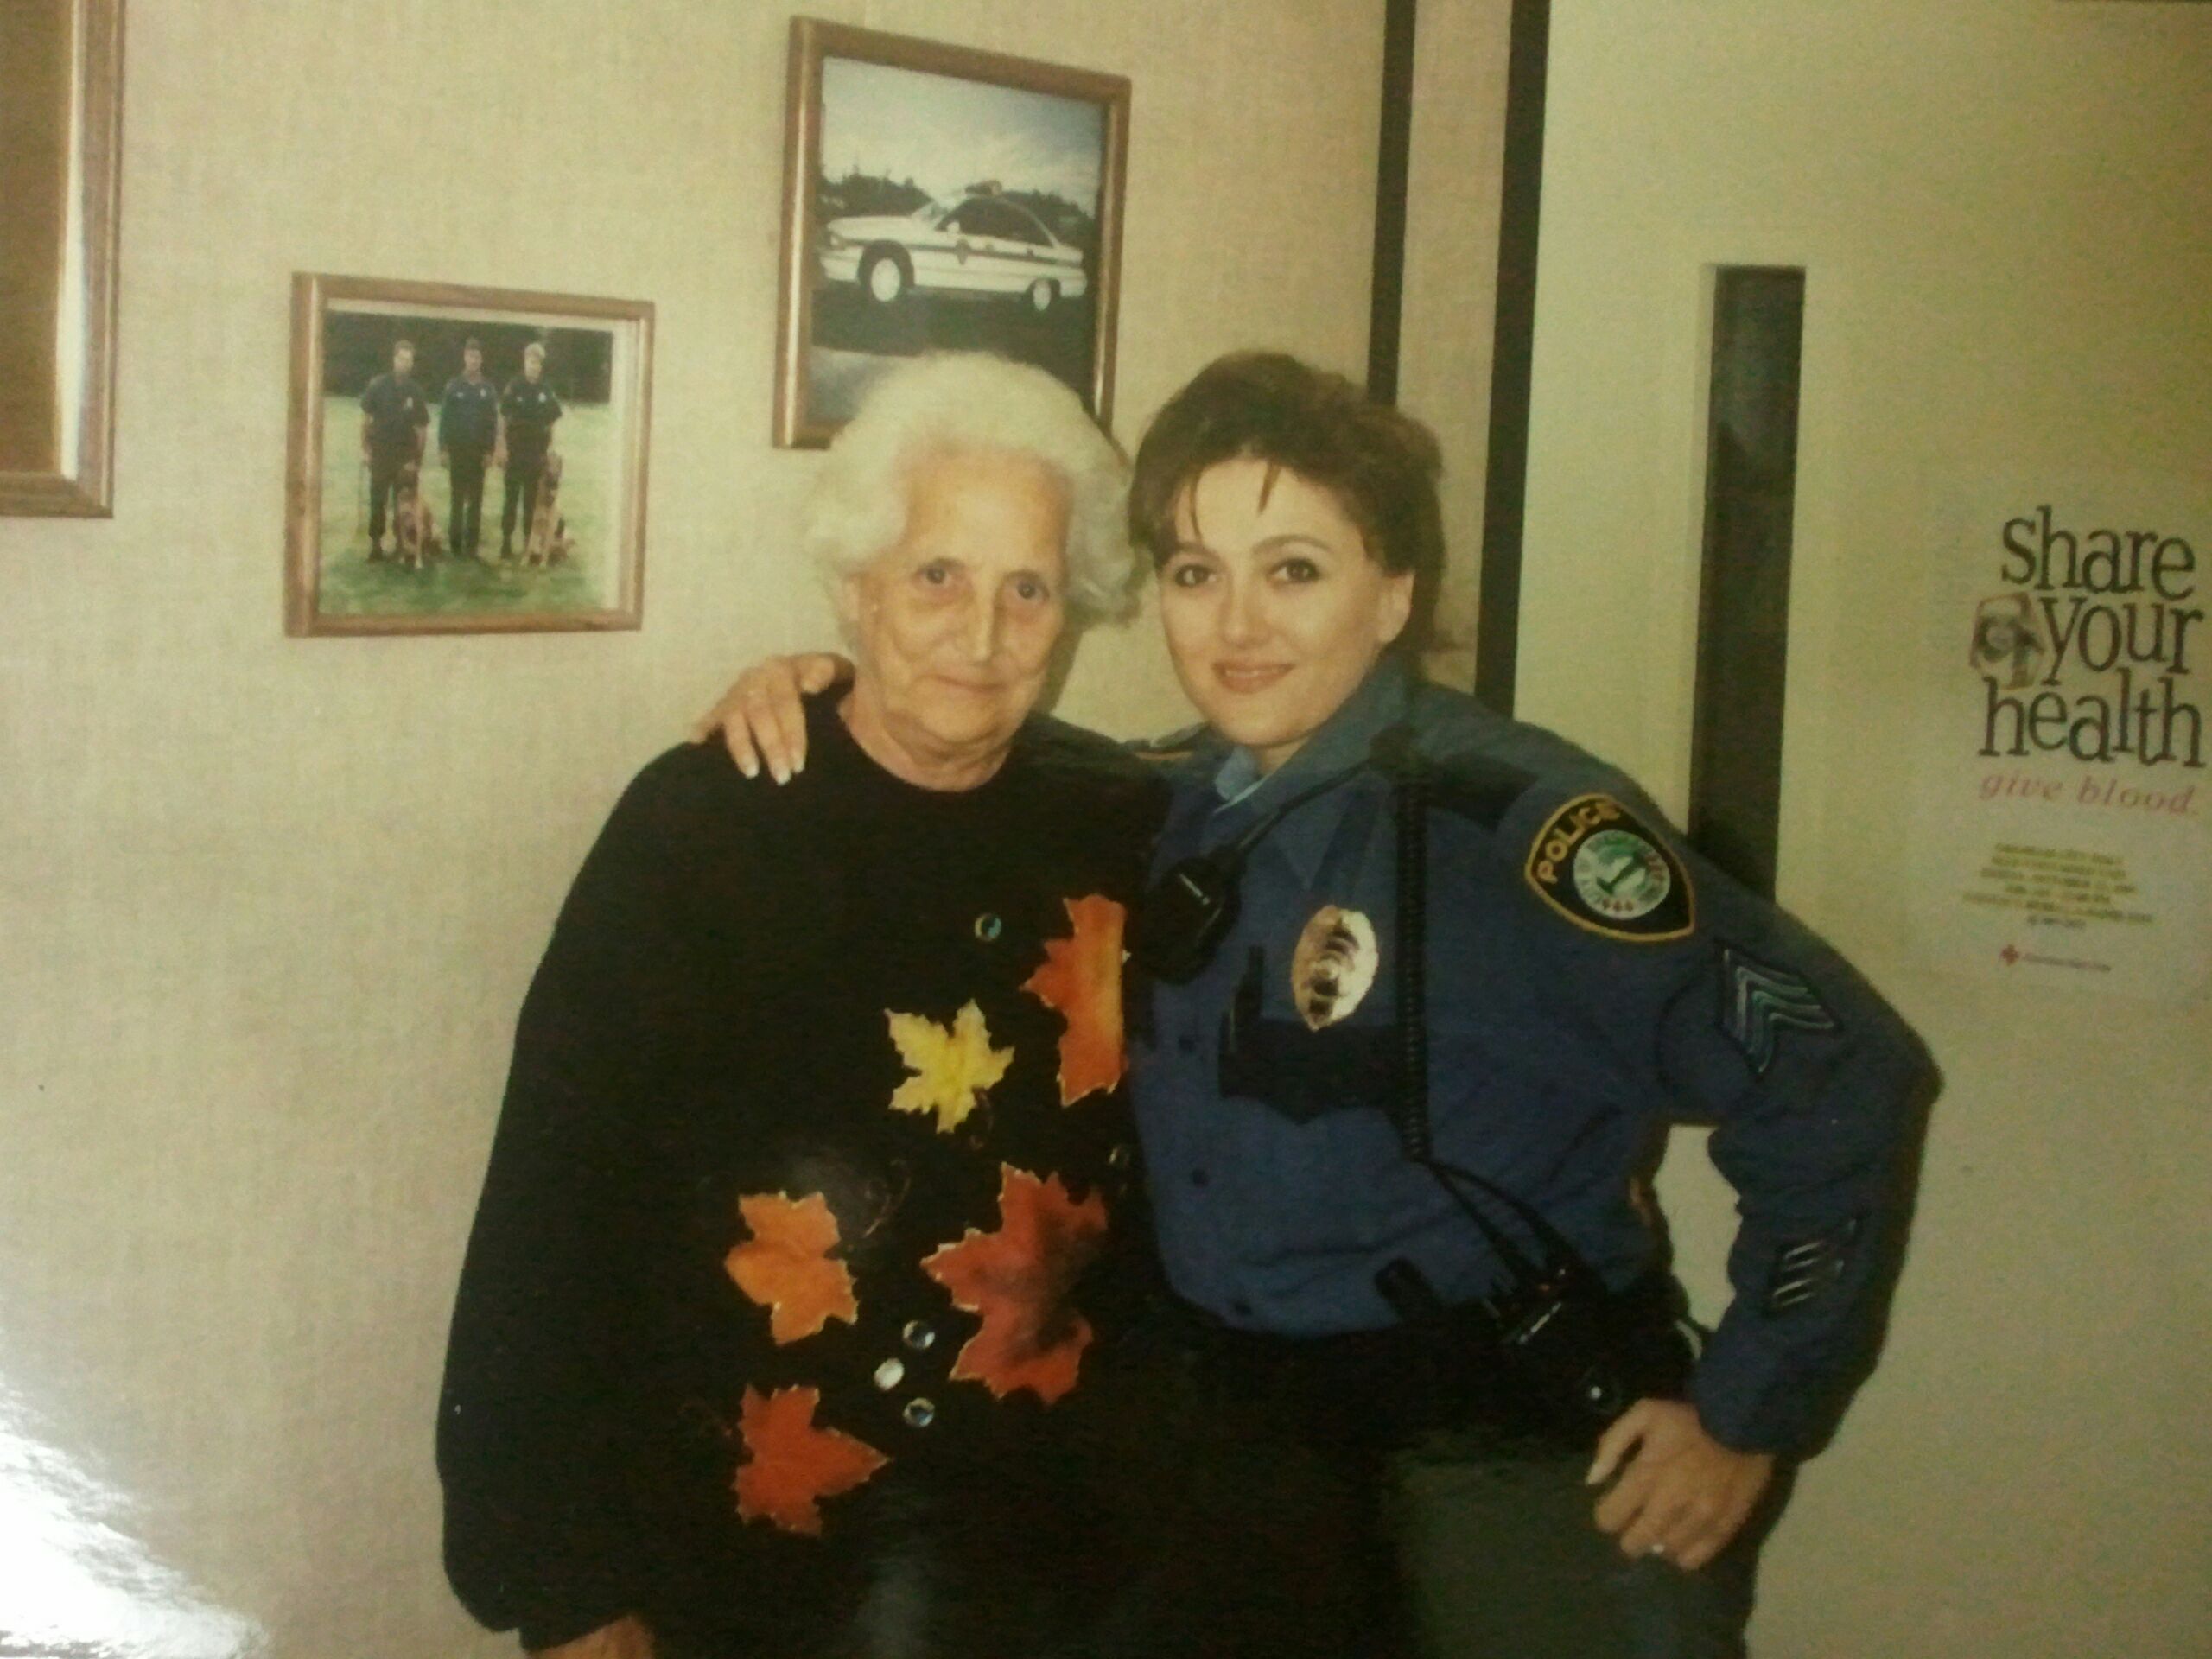 Sandra Doolittle, retired Police Sergeant and Trainer. It was my first calling, and an important one.